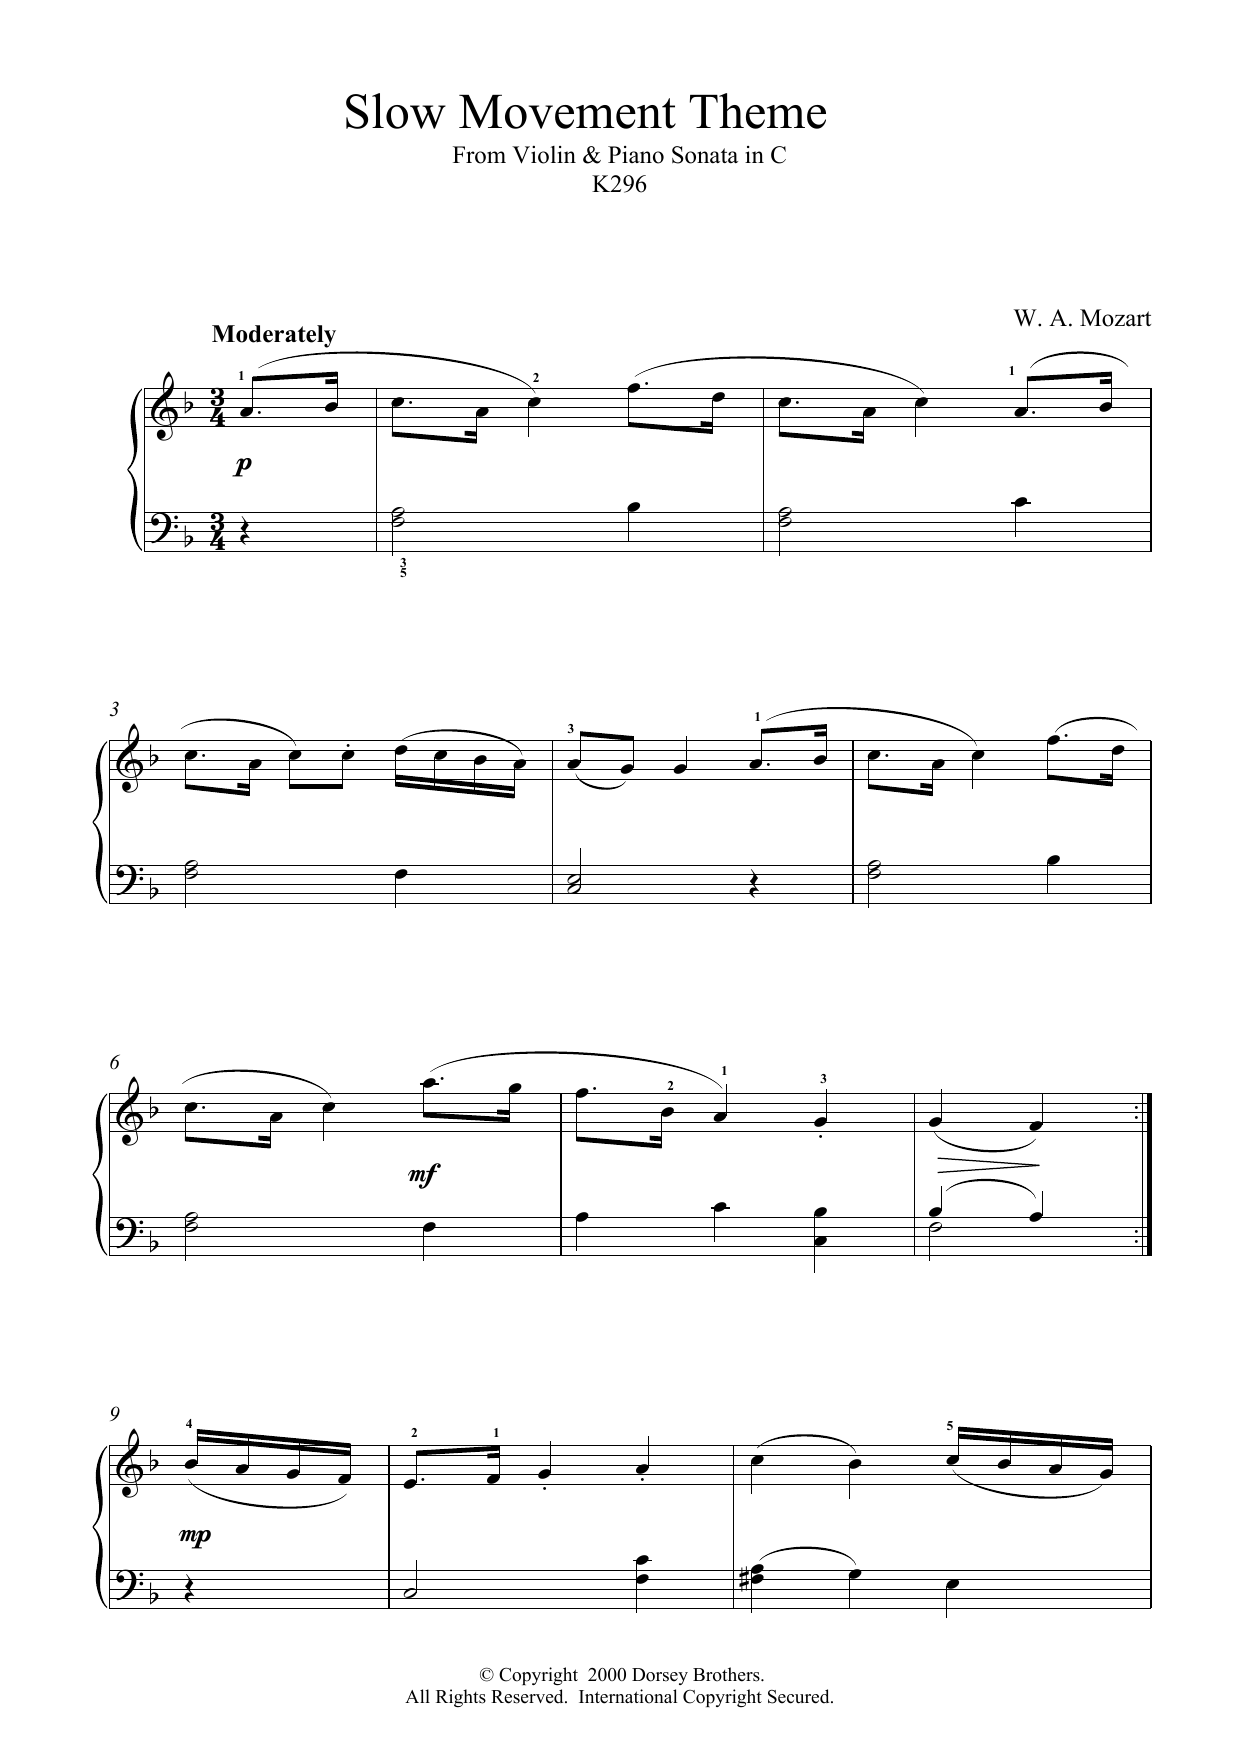 Download Wolfgang Amadeus Mozart Slow Movement Theme from Violin & Piano Sheet Music